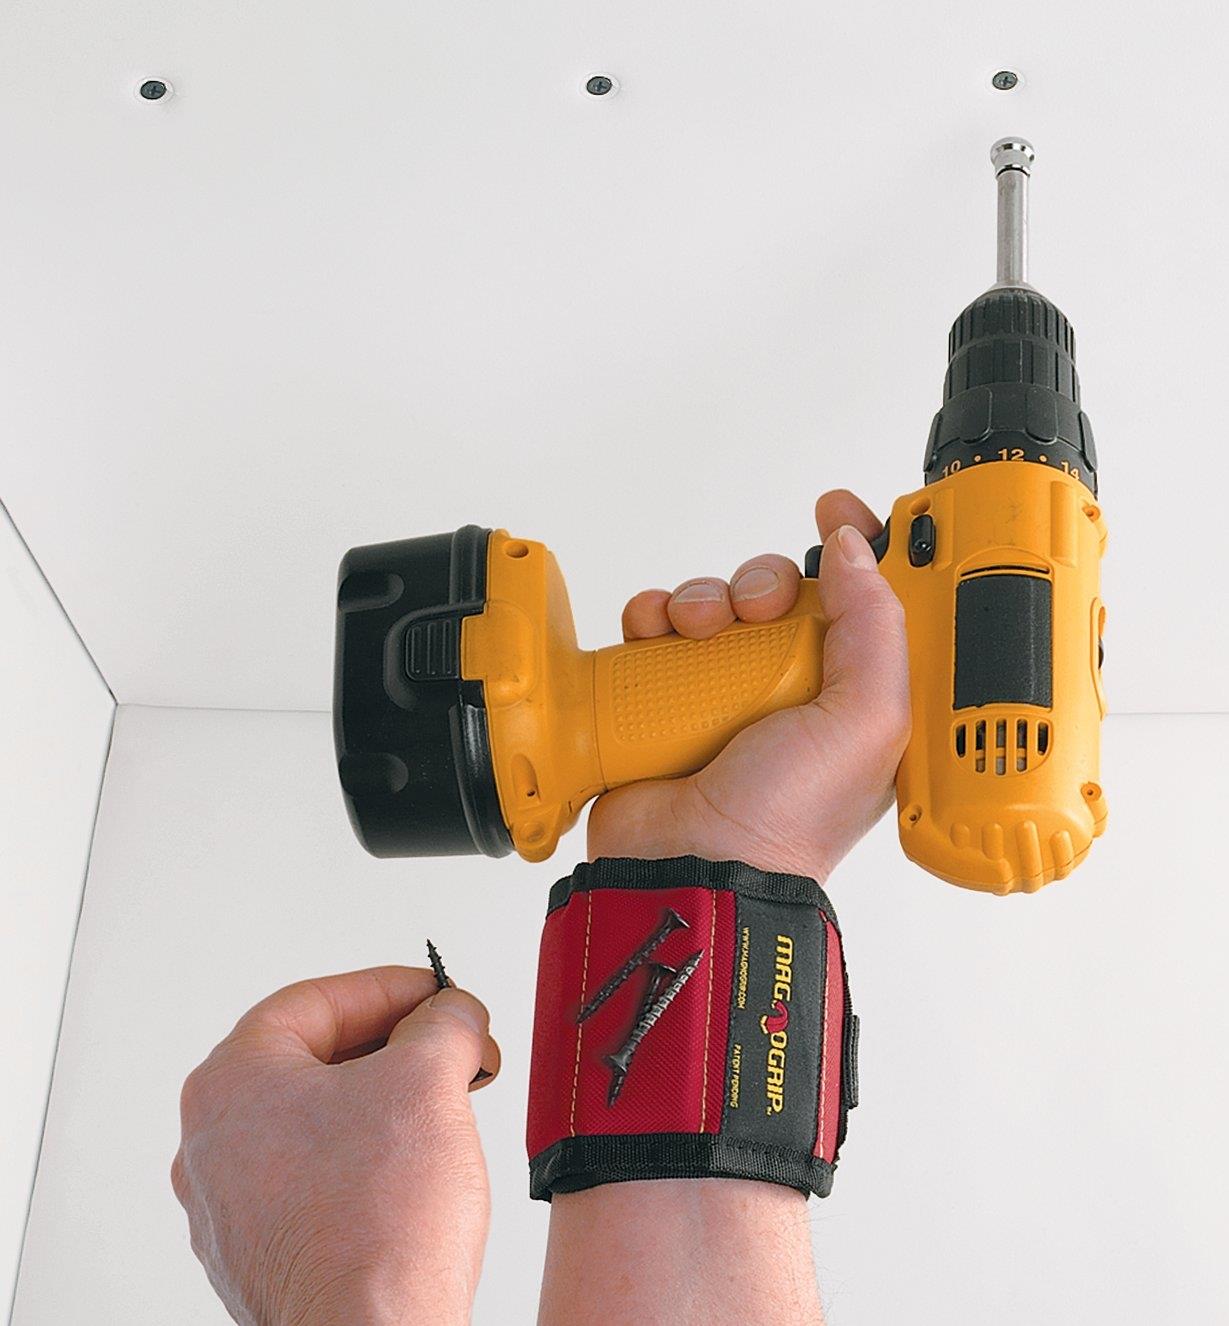 Holding a cordless drill while wearing a wrist nail holder with screws magnetically attached to it